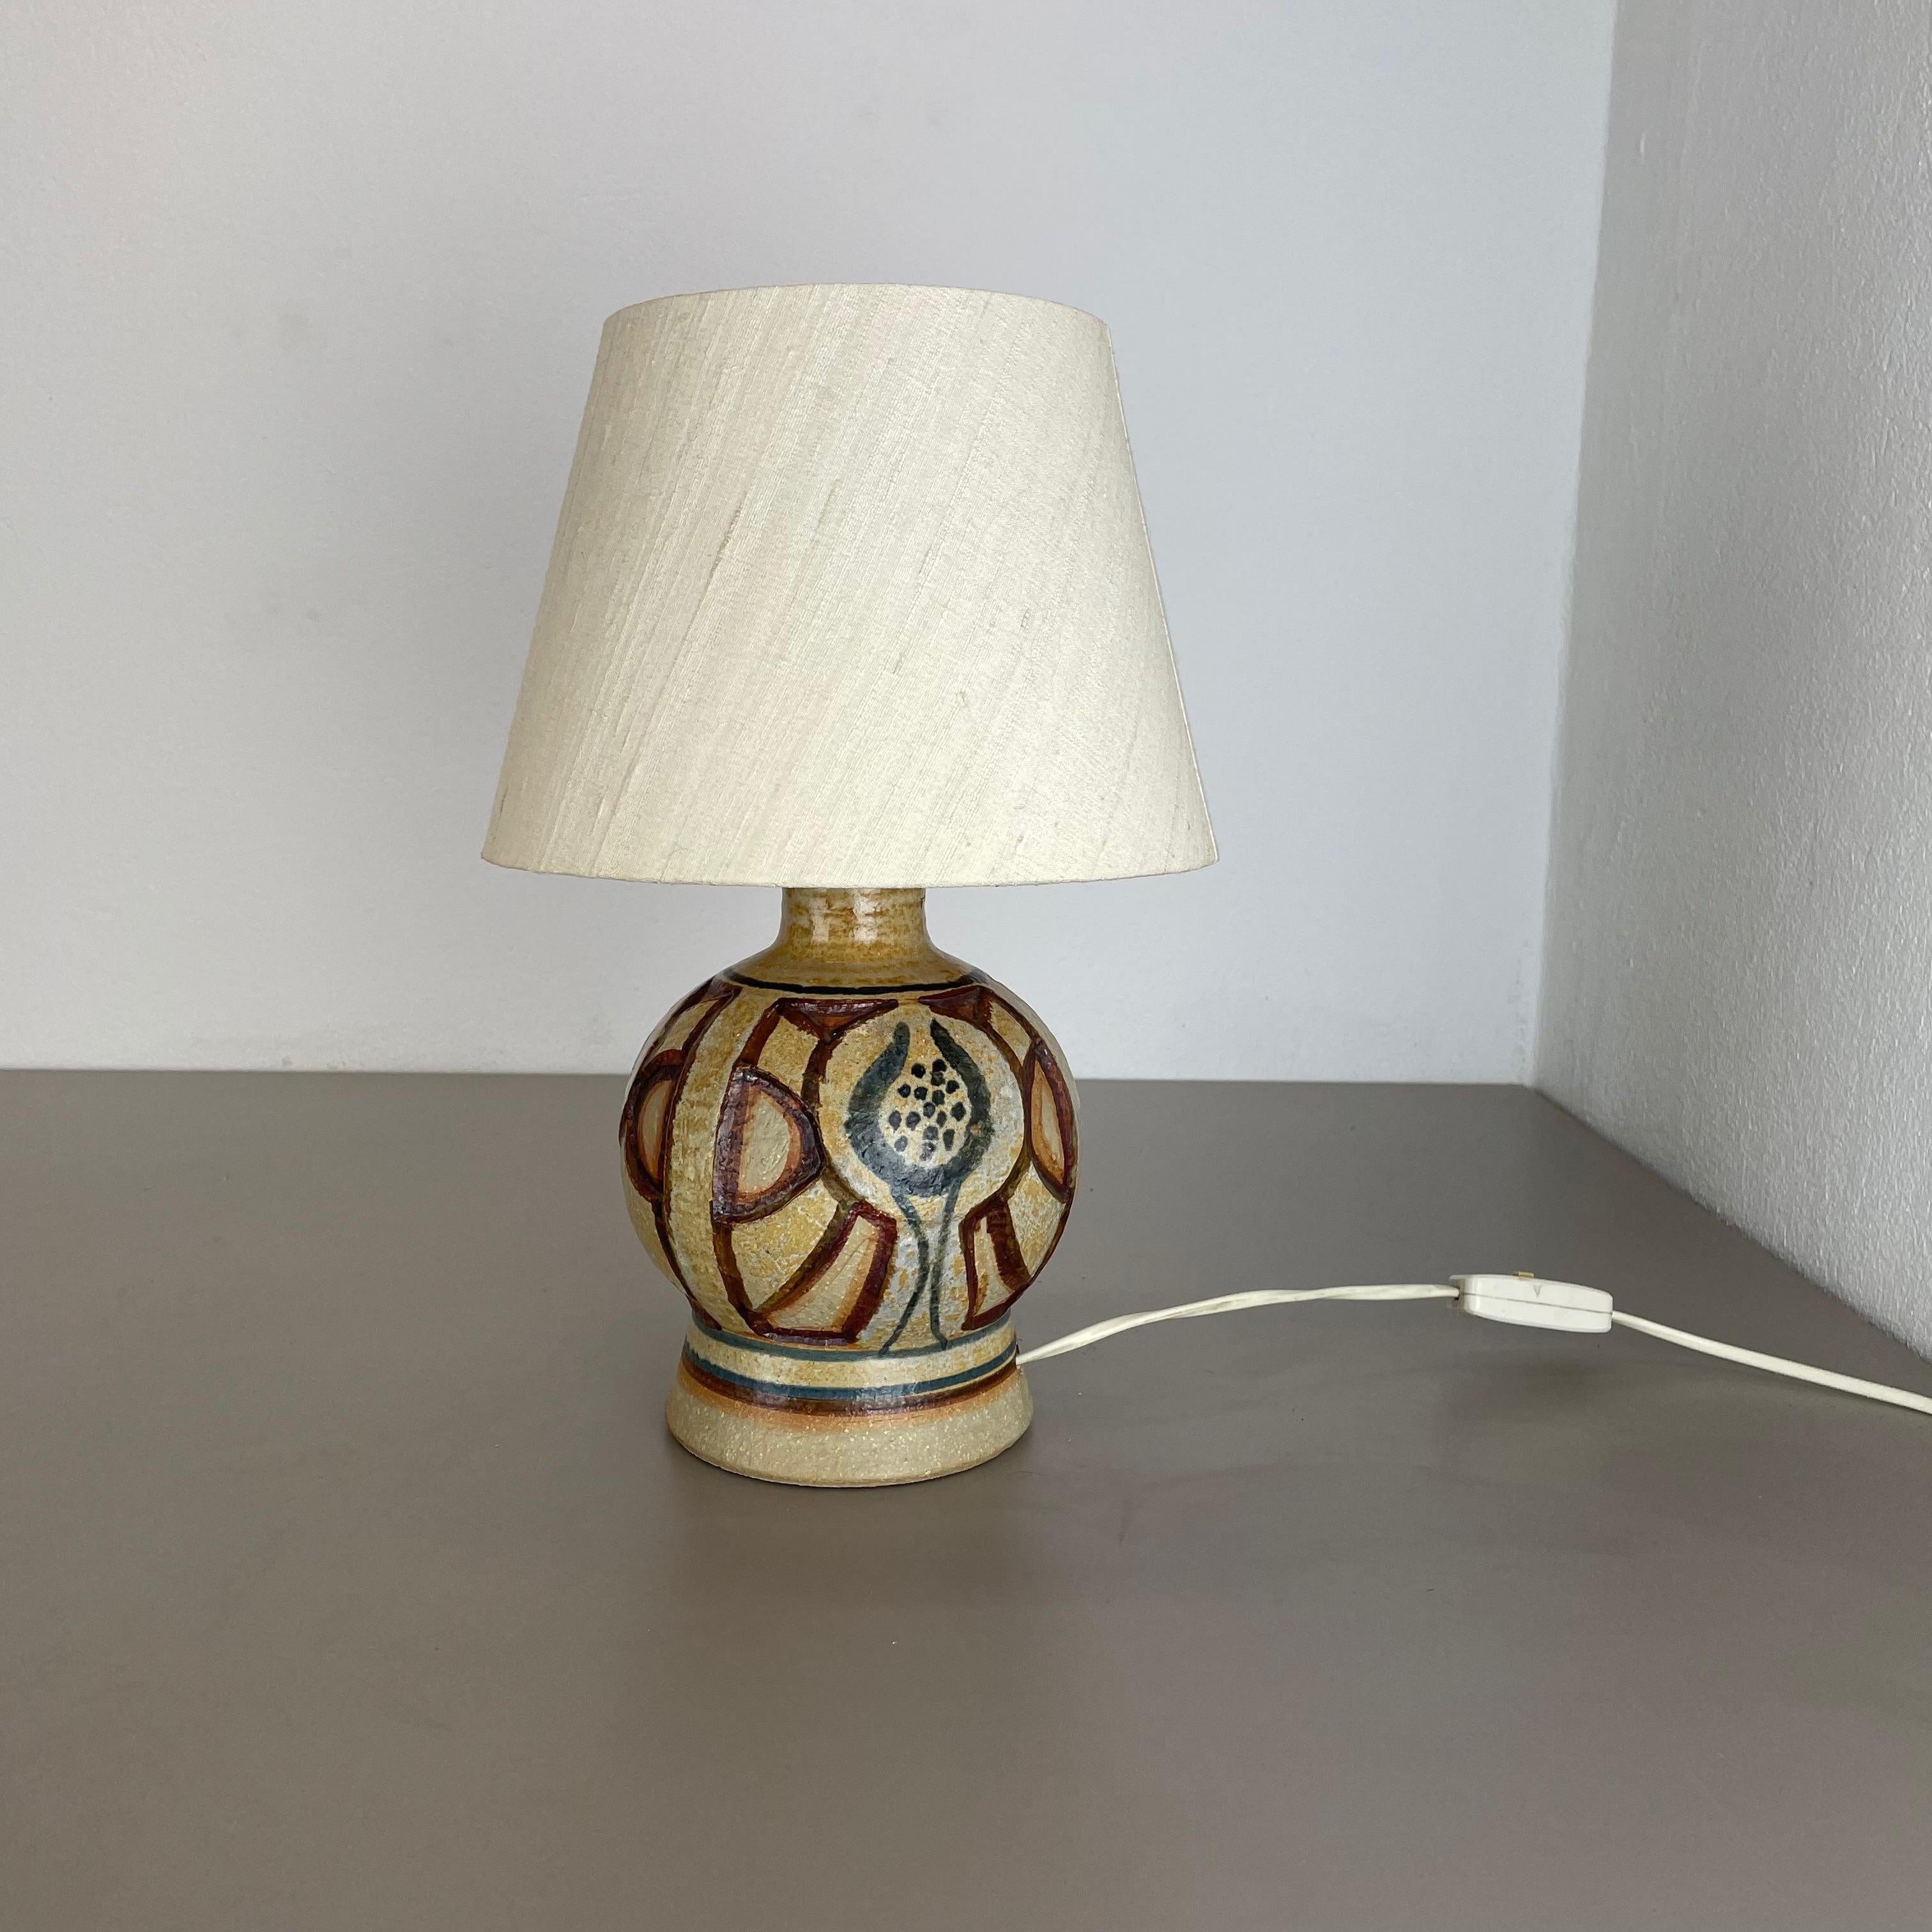 Article:

Ceramic table light base


Producer:

SOHOLM, Denmark




Decade:

1970s





This original vintage ceramic Pottery light base was designed and produced by SOHOLM in Denmark in the 1970s. It is made of solid pottery and